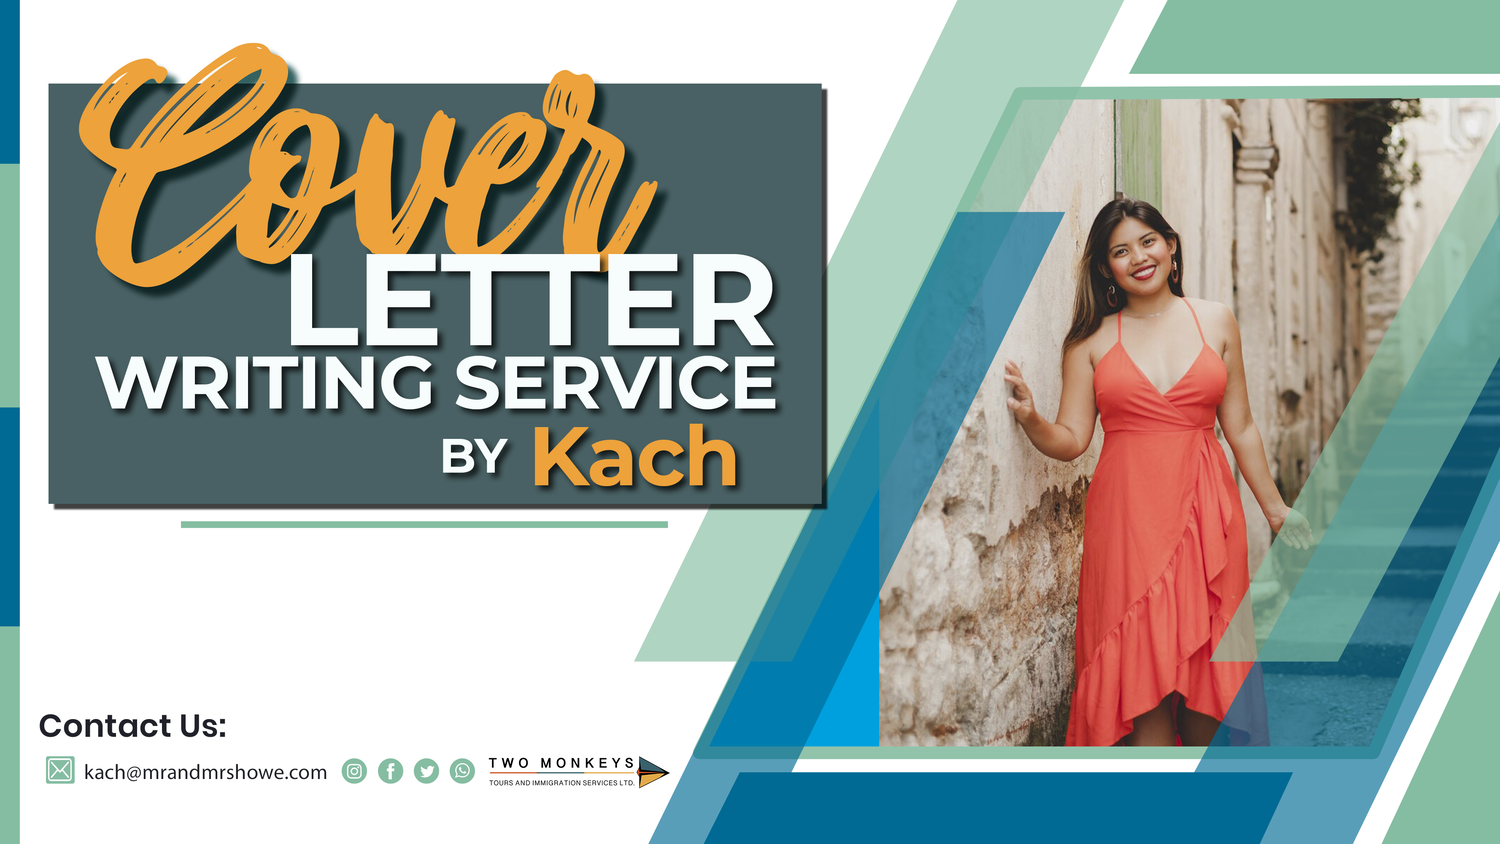 Letter Writing Service